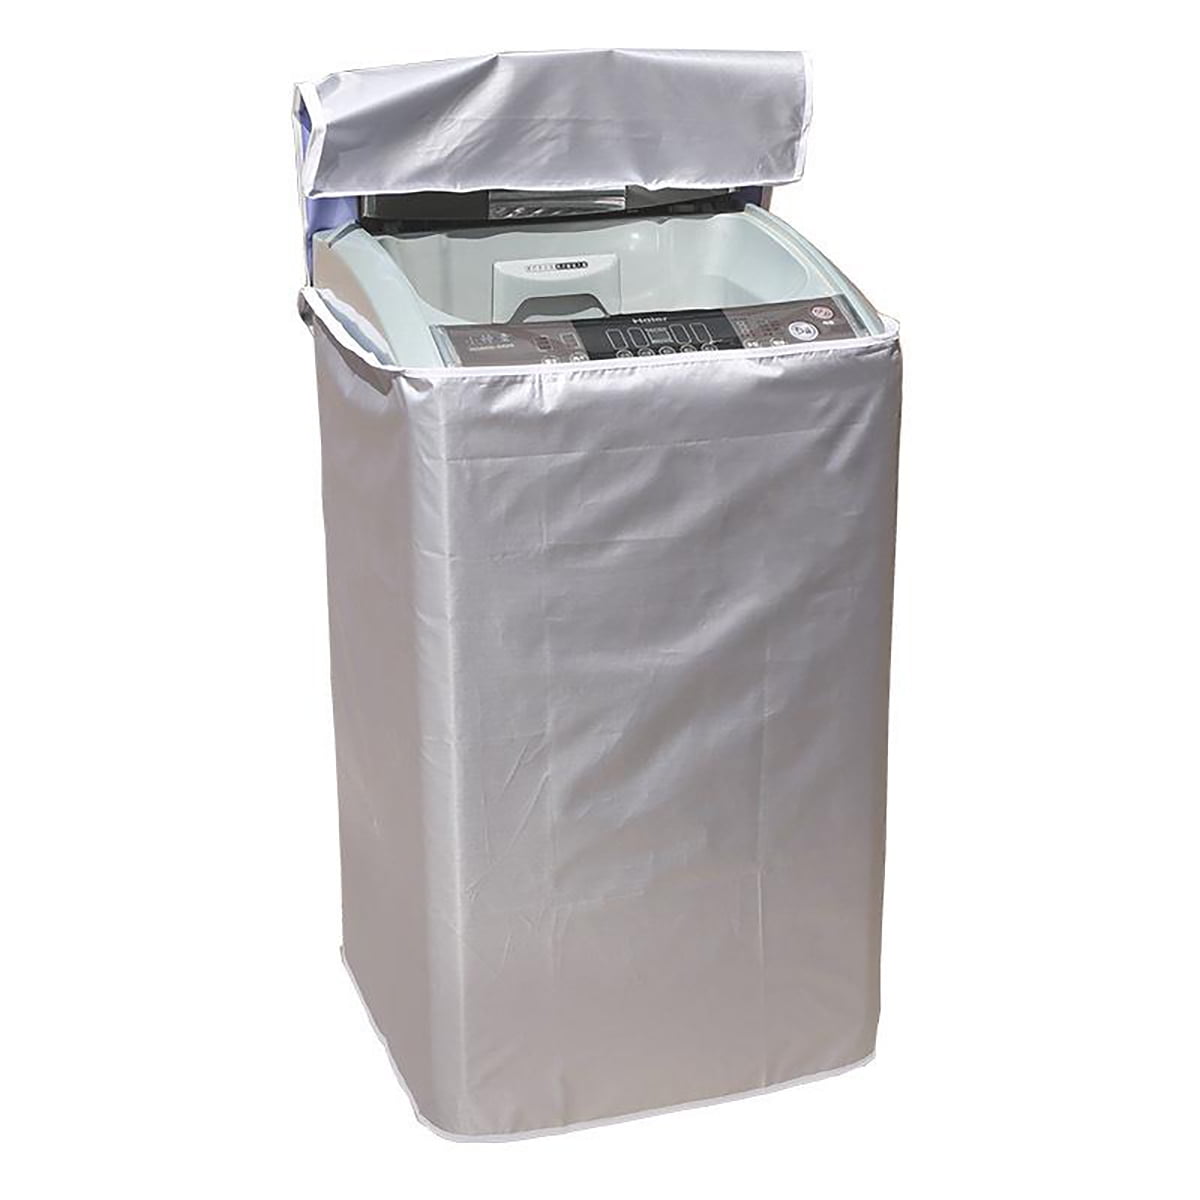 Silver LIOOBO Top Load Washing Machine Cover Automatic Washer and Dryer Cover Waterproof Dustproof Anti-Splash Zippered 595784cm 